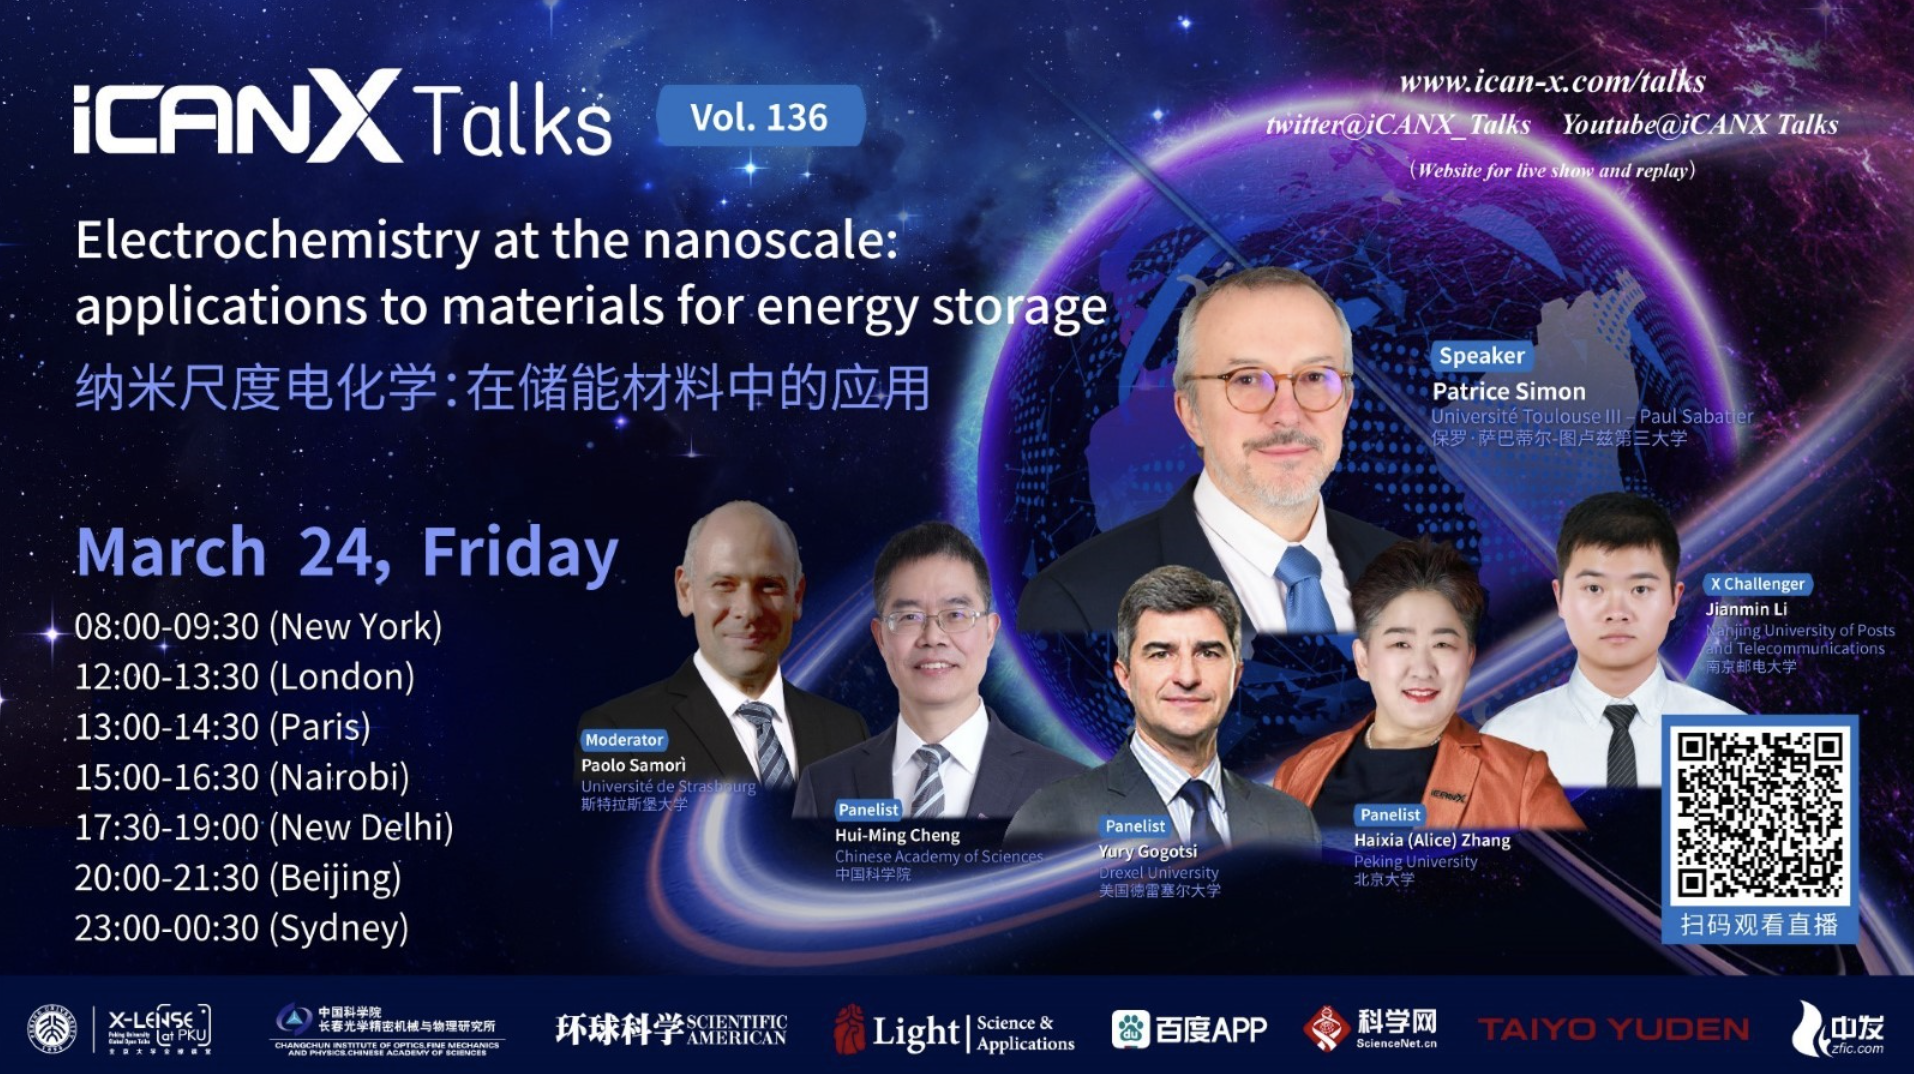 iCANX Talk “Electrochemistry at the Nanoscale: Applications to Materials for Energy Storage”